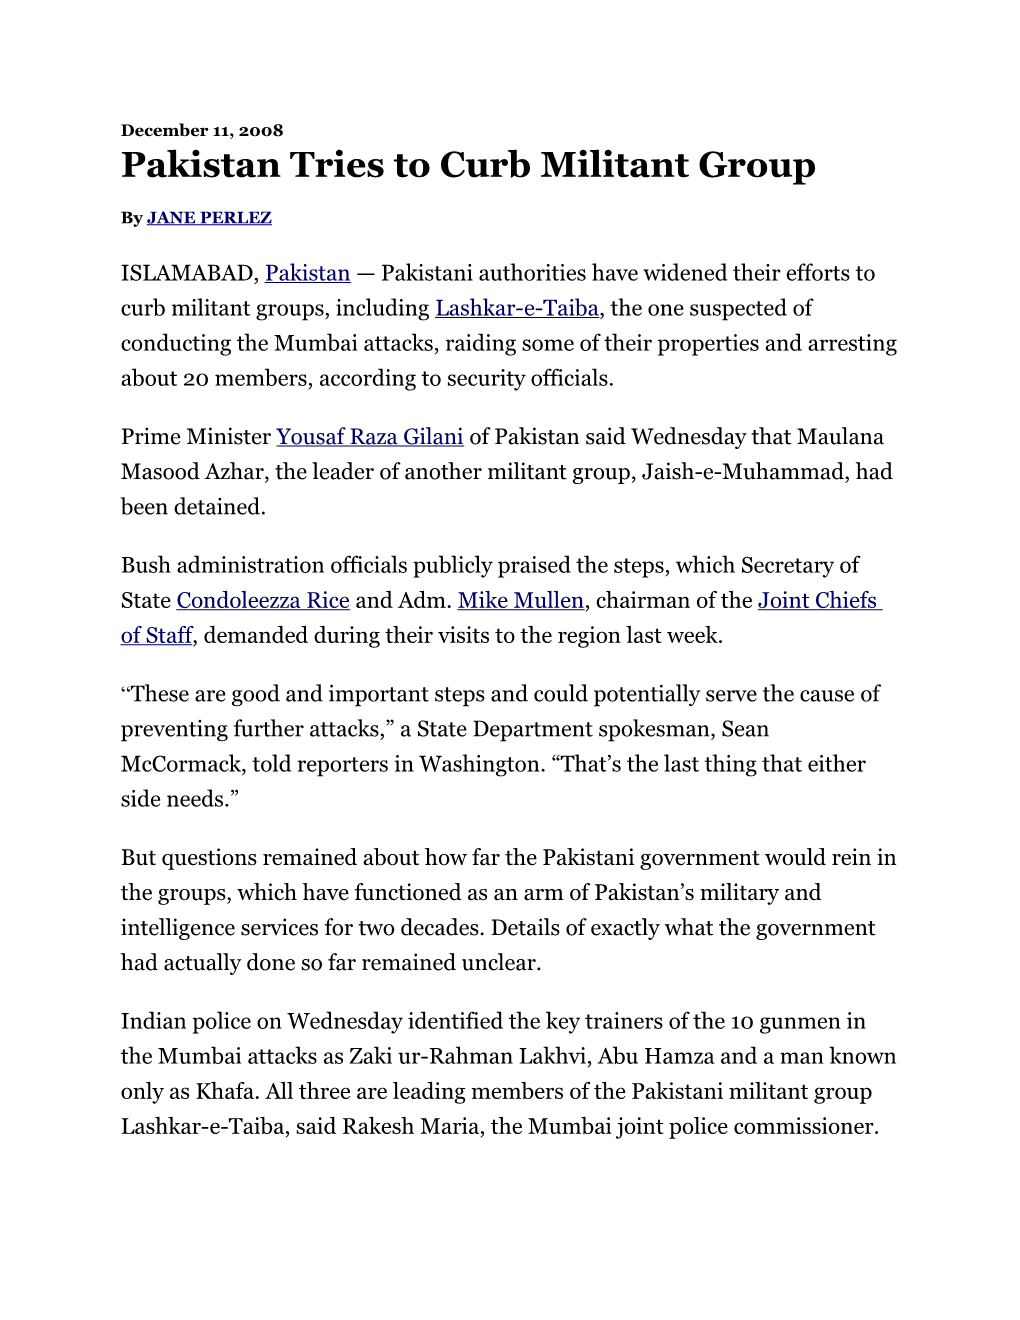 Pakistan Tries to Curb Militant Group